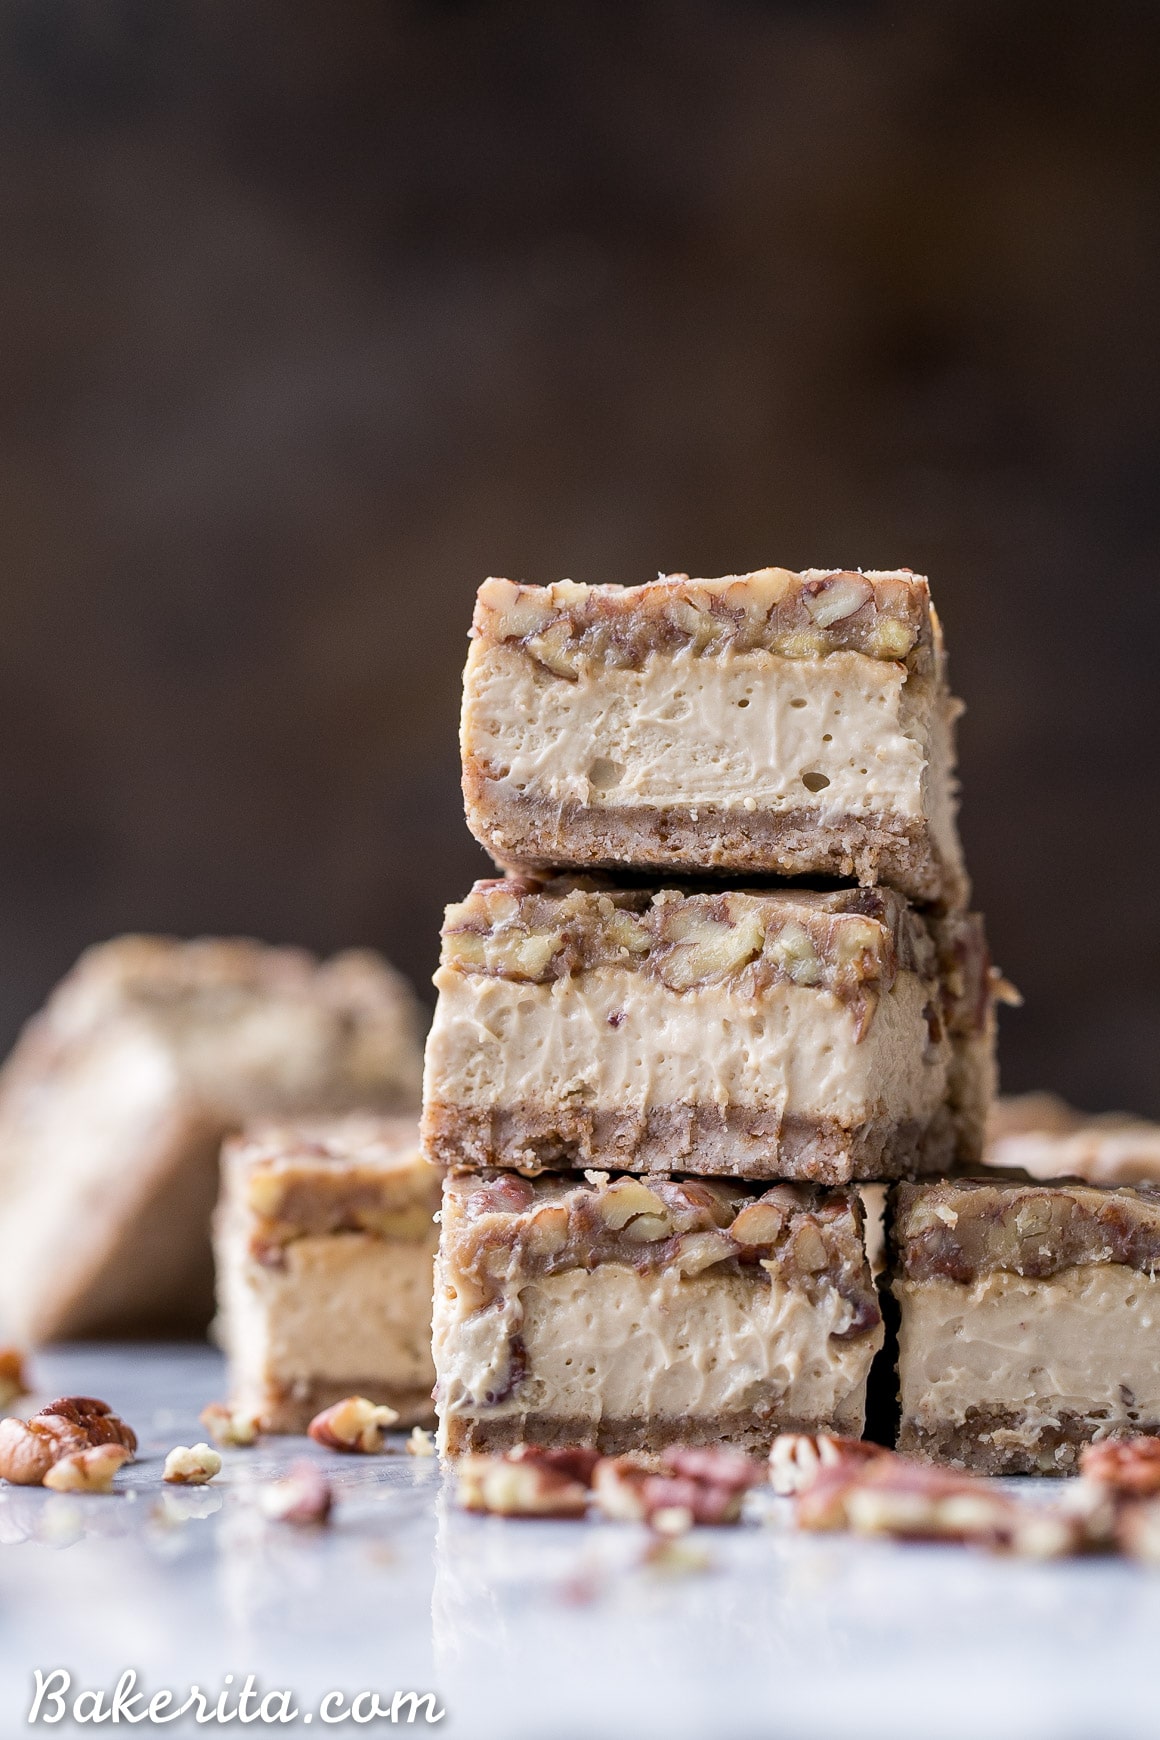 These Gluten Free Pecan Praline Cheesecake Bars will be your new favorite dessert! The super creamy cheesecake filling has a sweet + crunchy pecan praline topping.